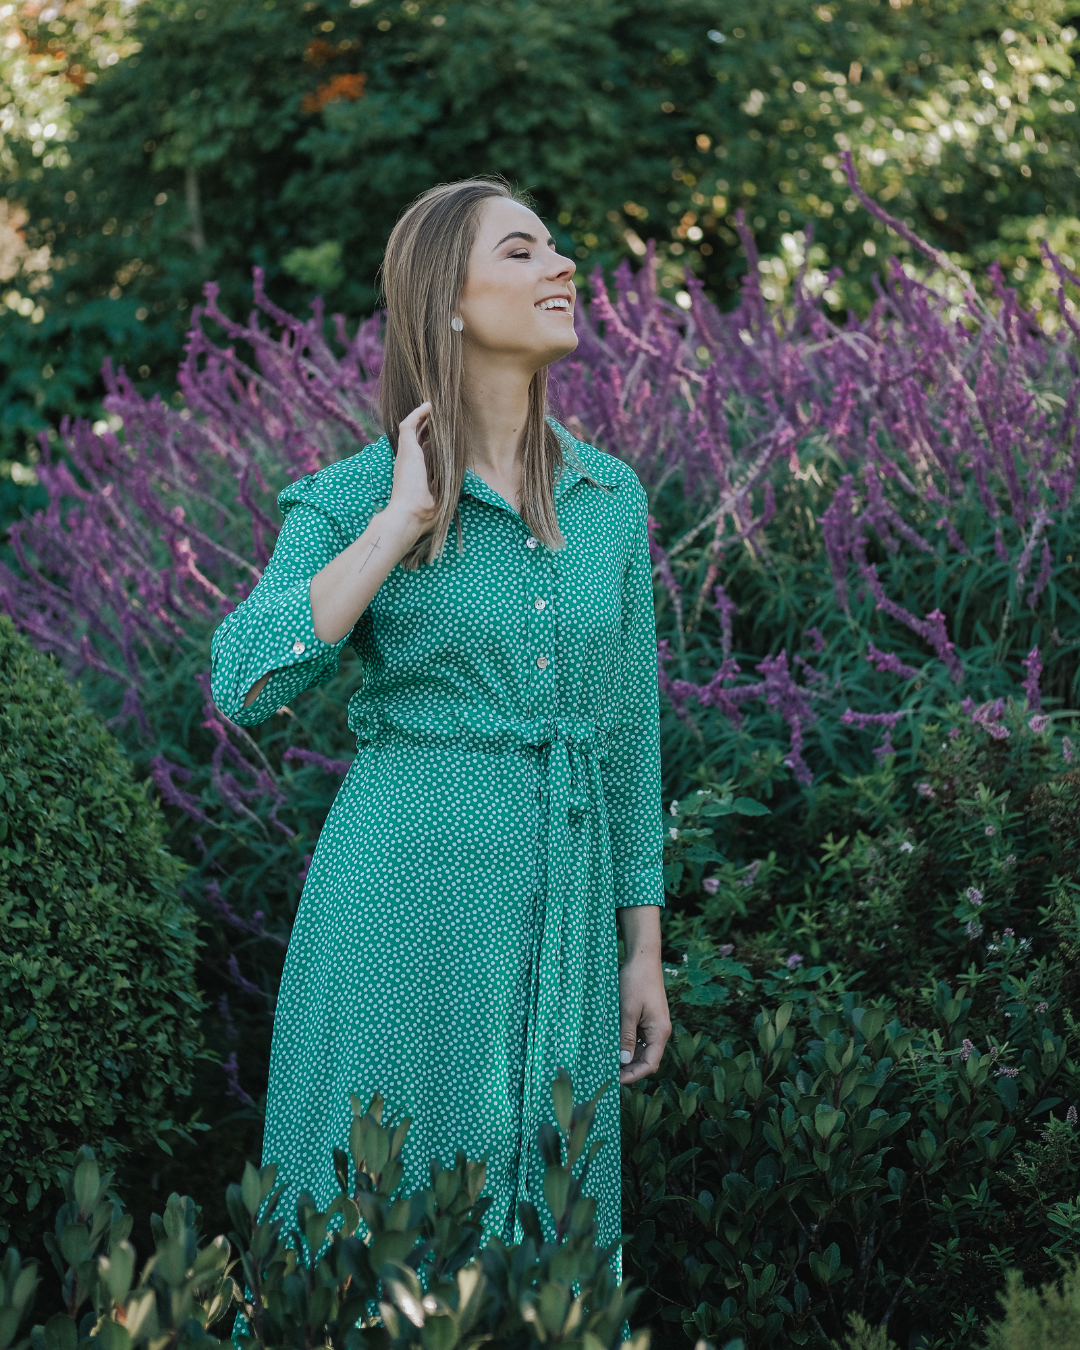 Green Spotted Button-through Dress